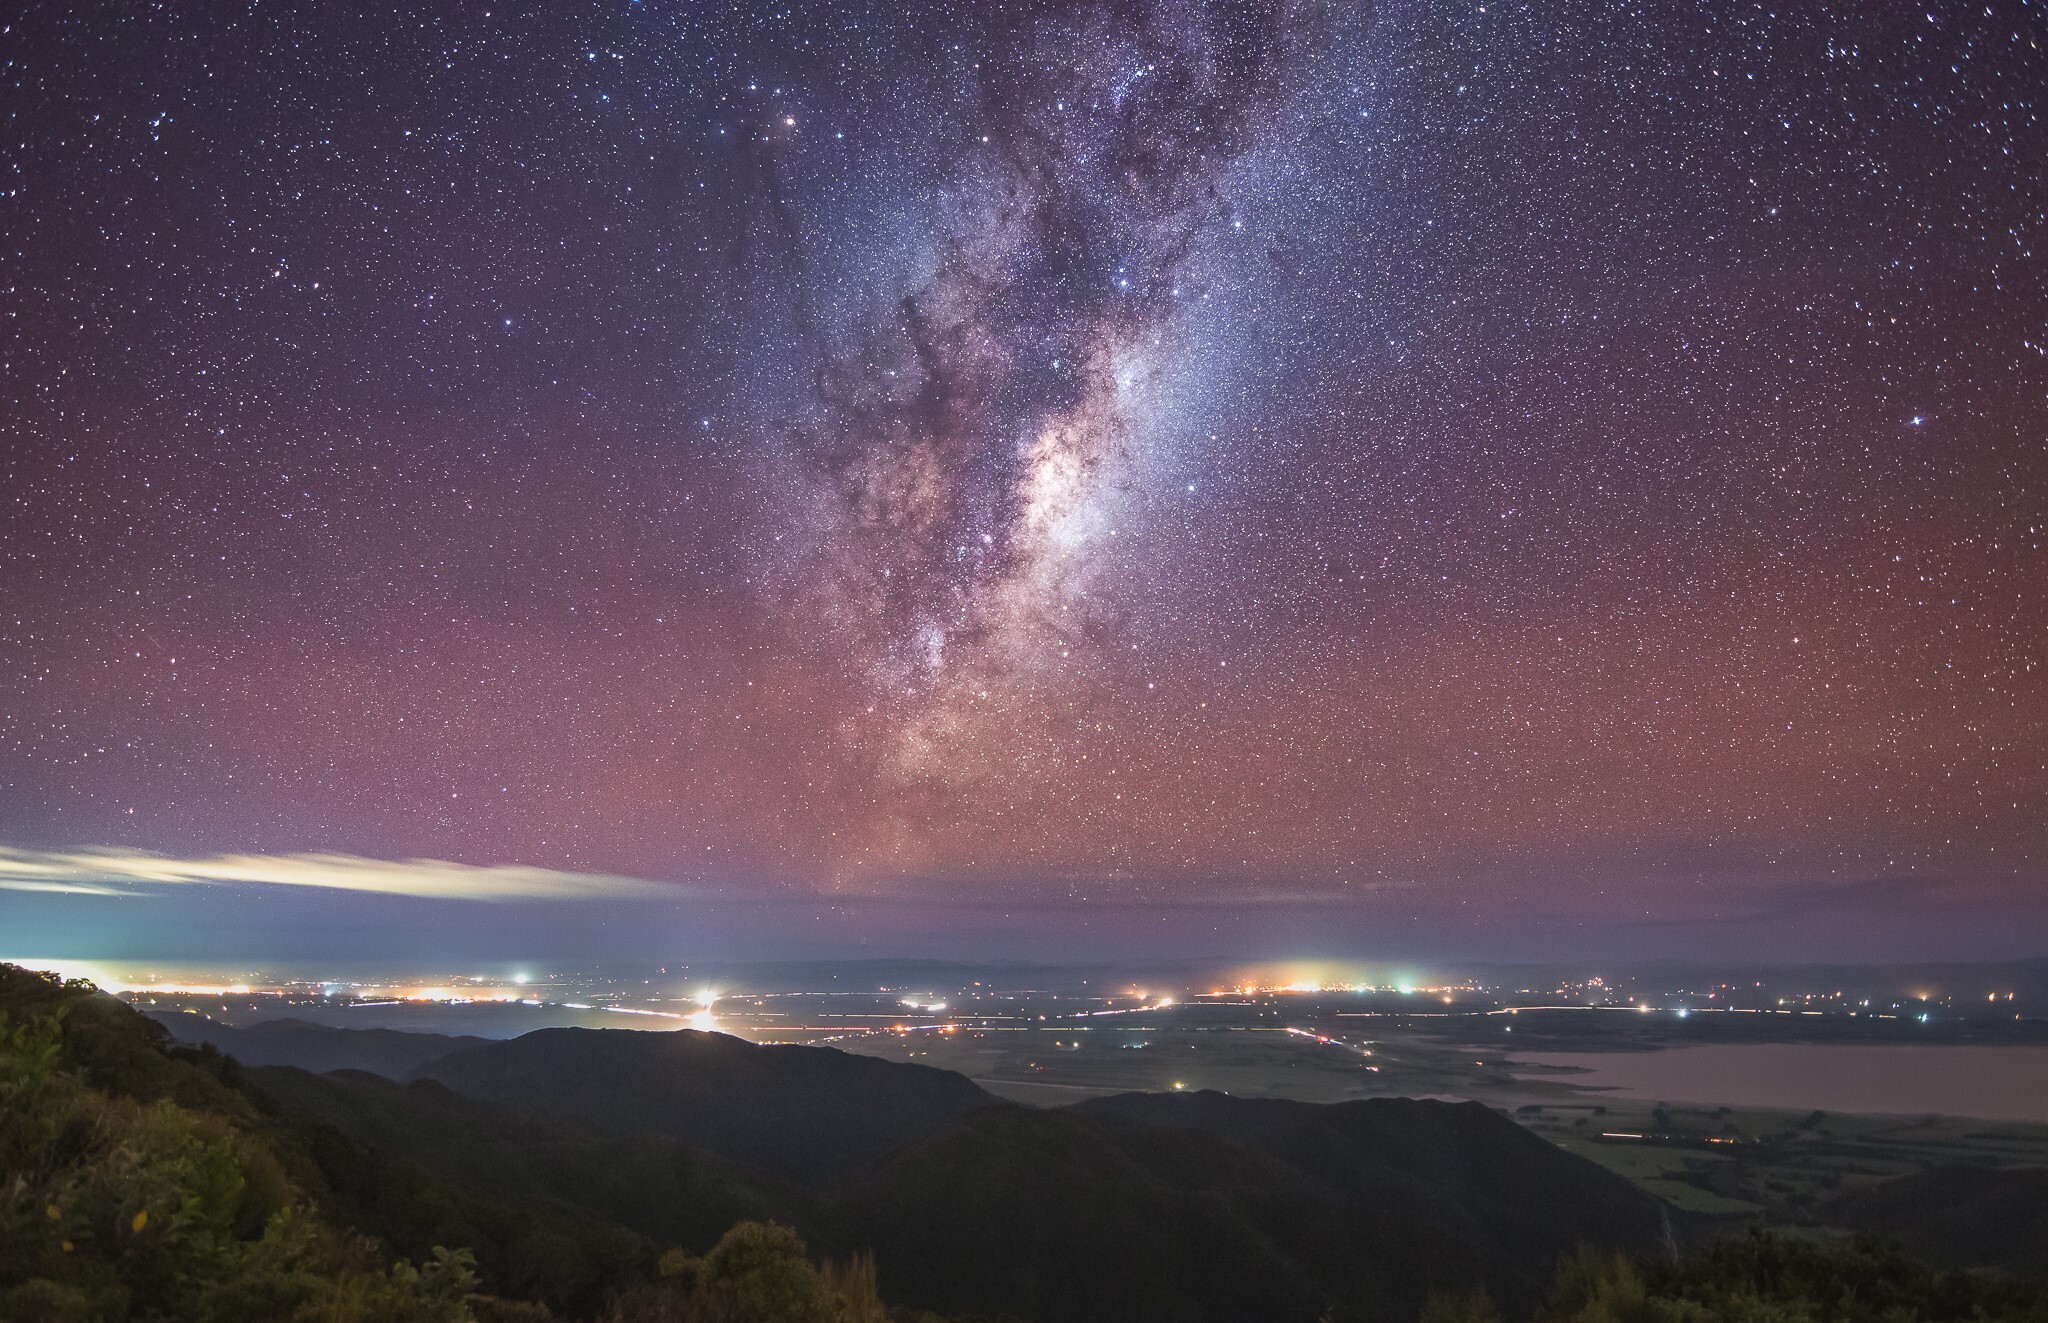 Request for support for a petition to reduce light pollution at night in New Zealand Image